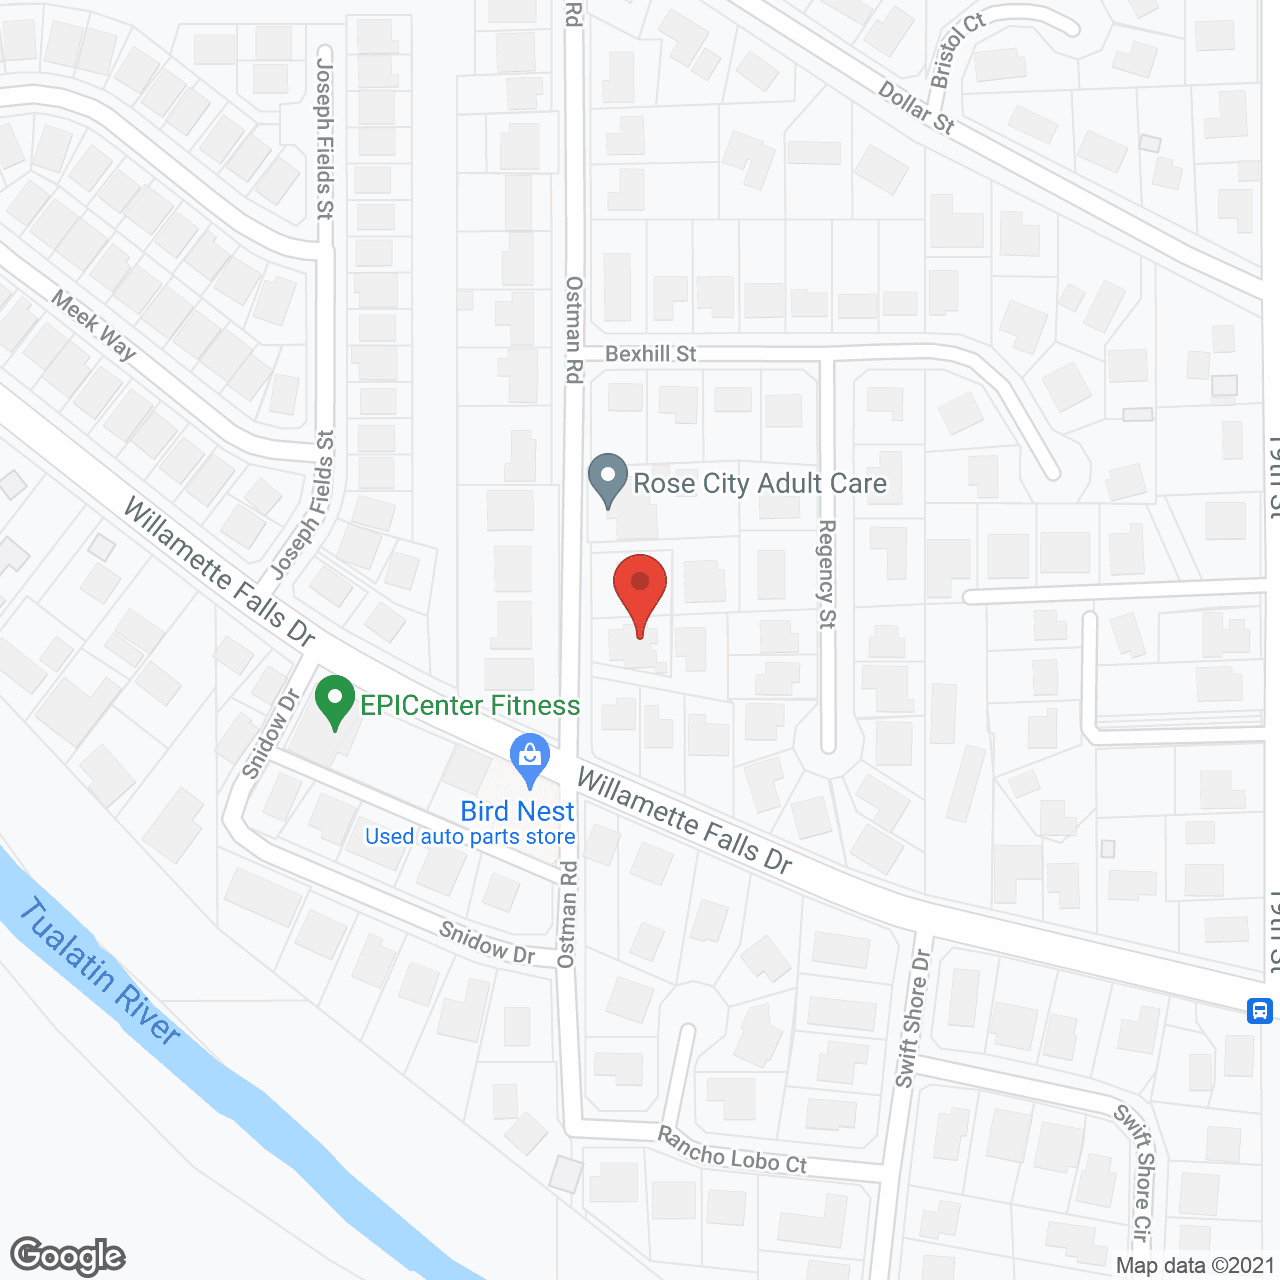 West Linn Adult Care Home in google map